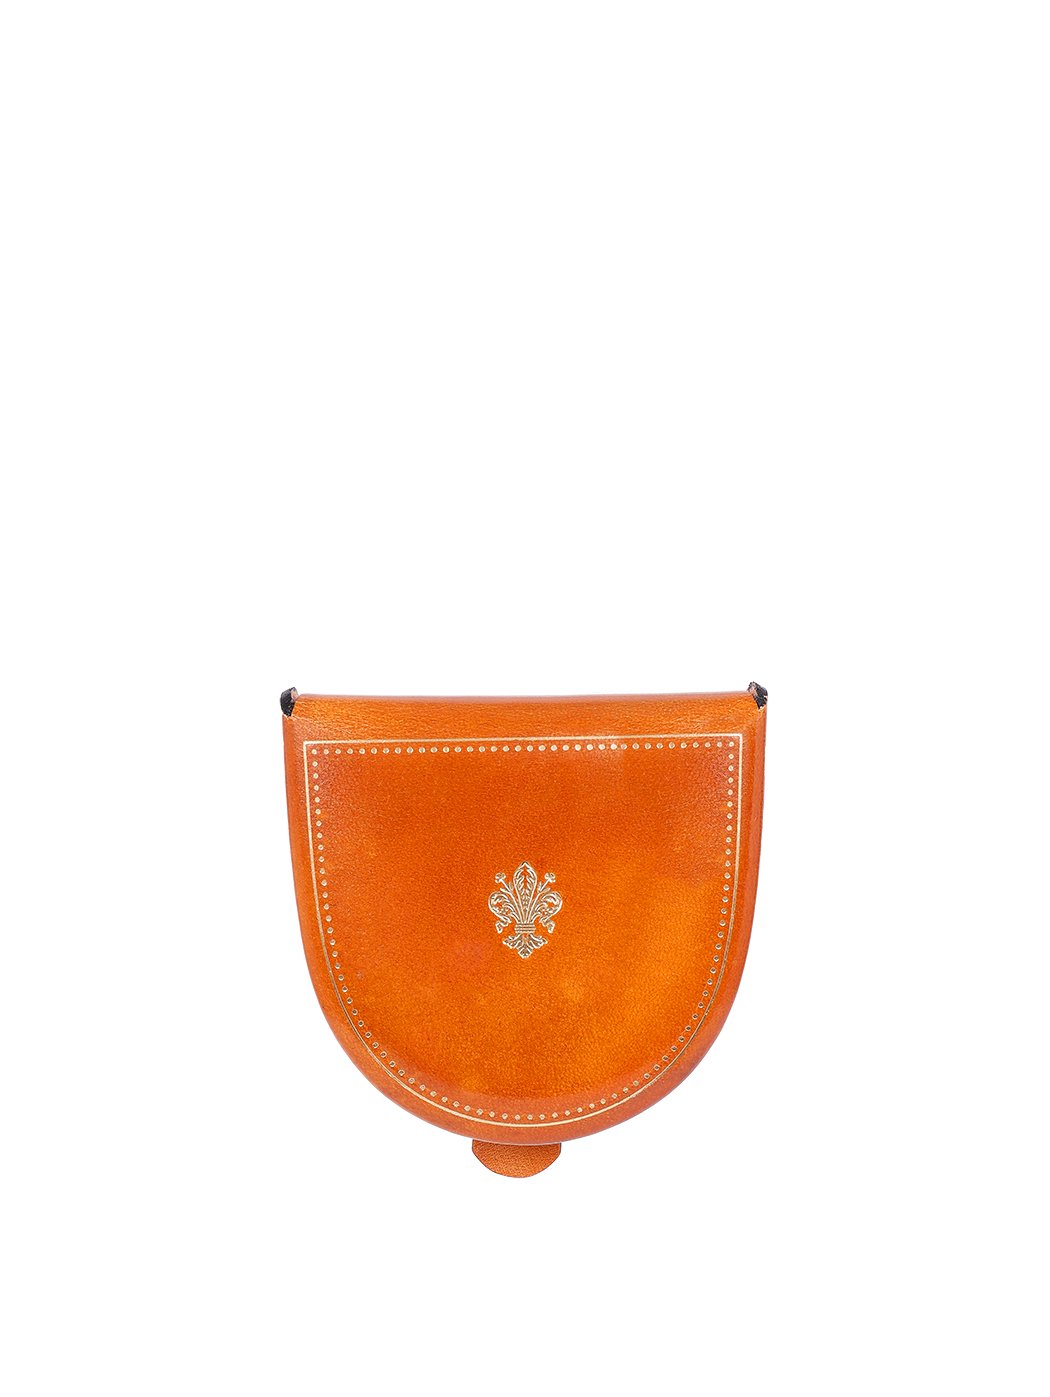 Florentine Lily Tacco Coin Pouch Orange